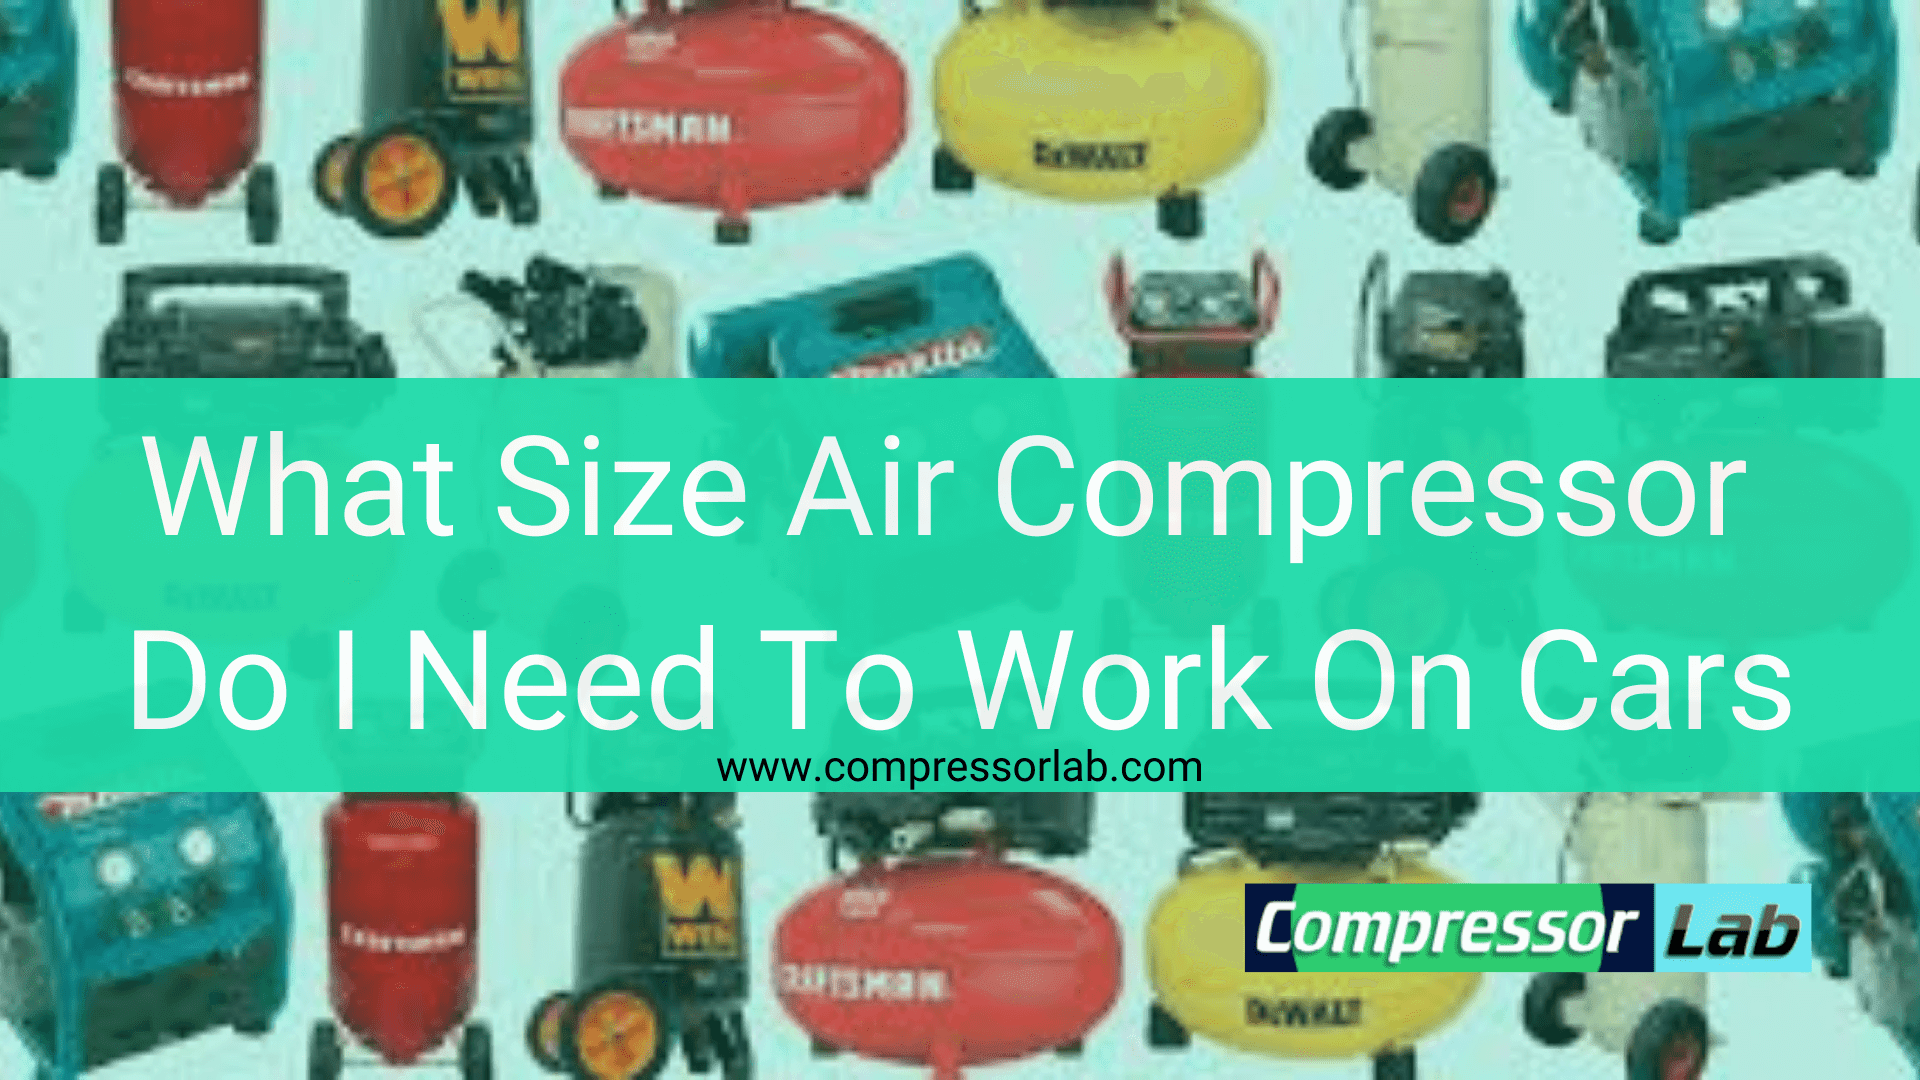 What Size Air Compressor Do I Need To Work On Cars